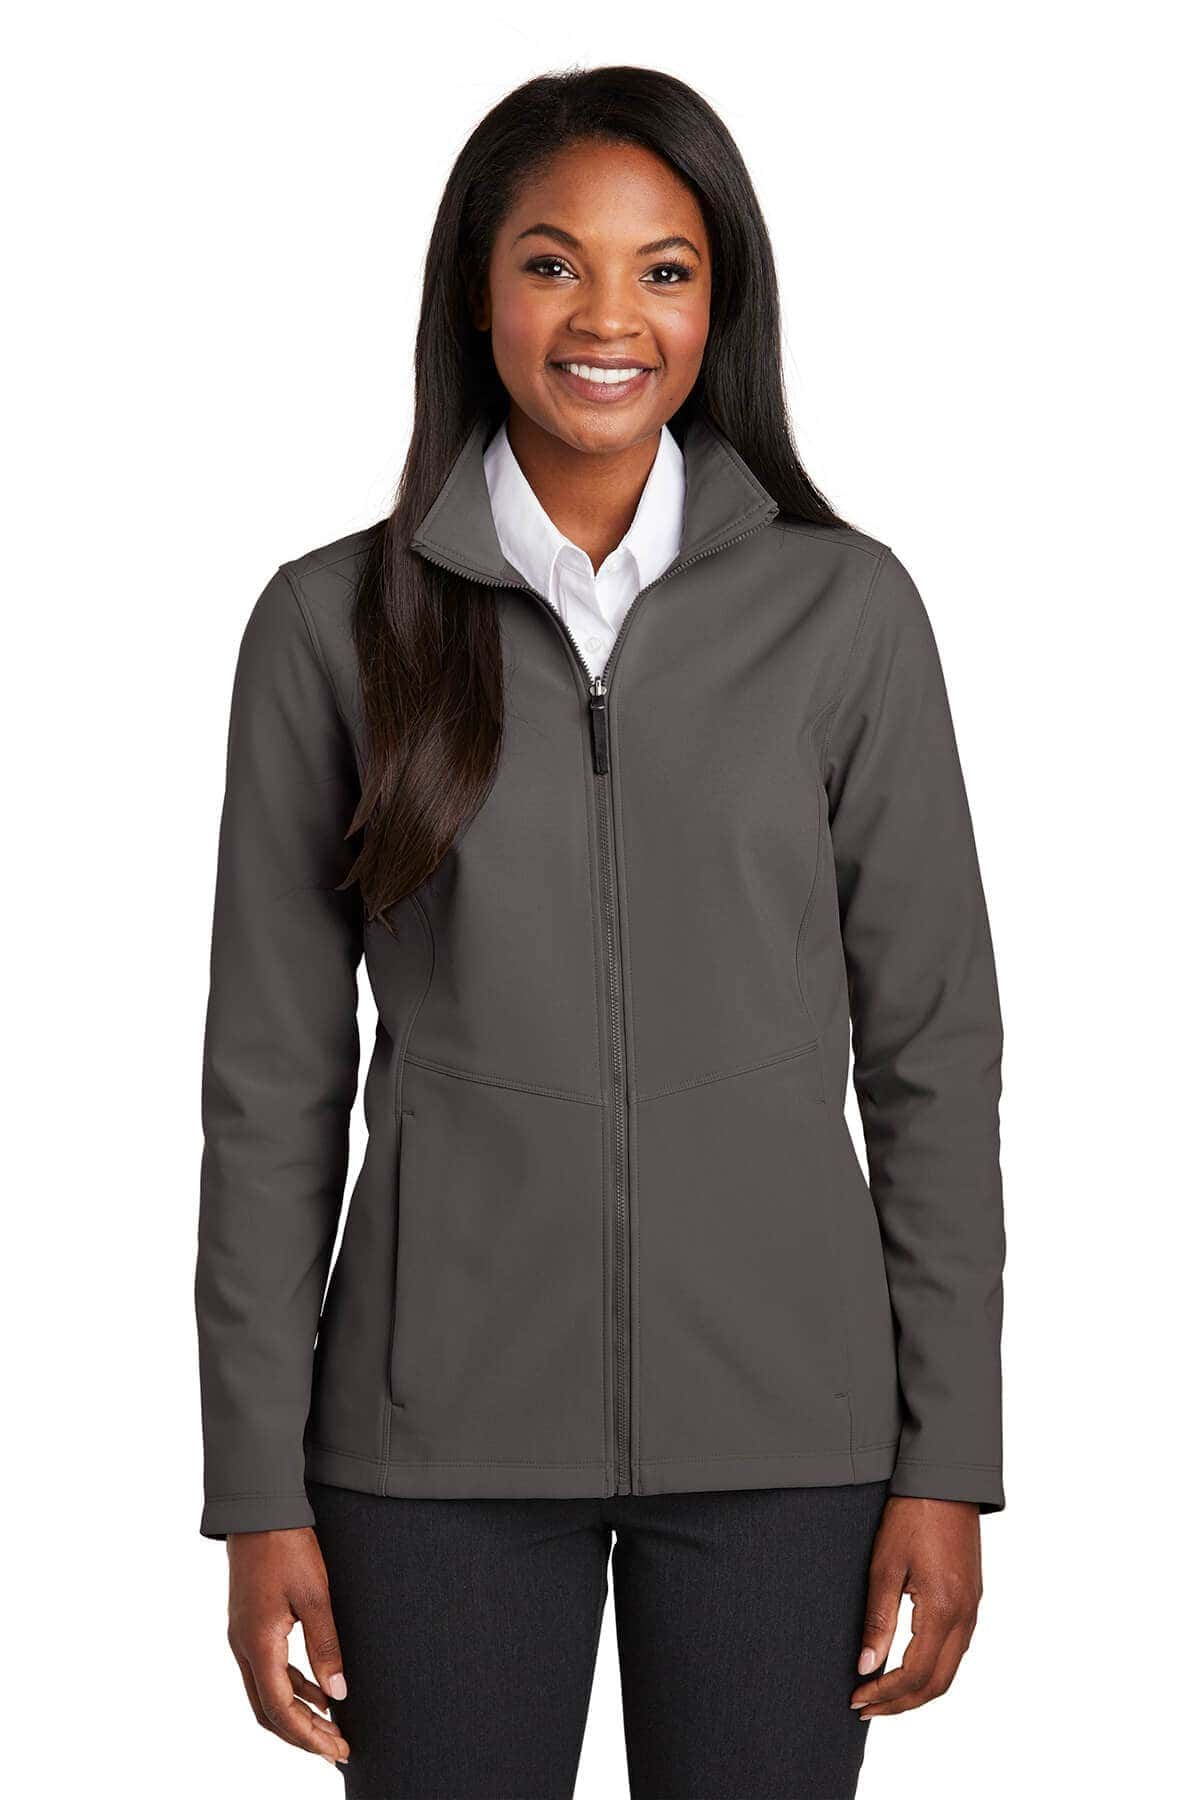 Port Authority ® Ladies Collective Soft Shell Jacket